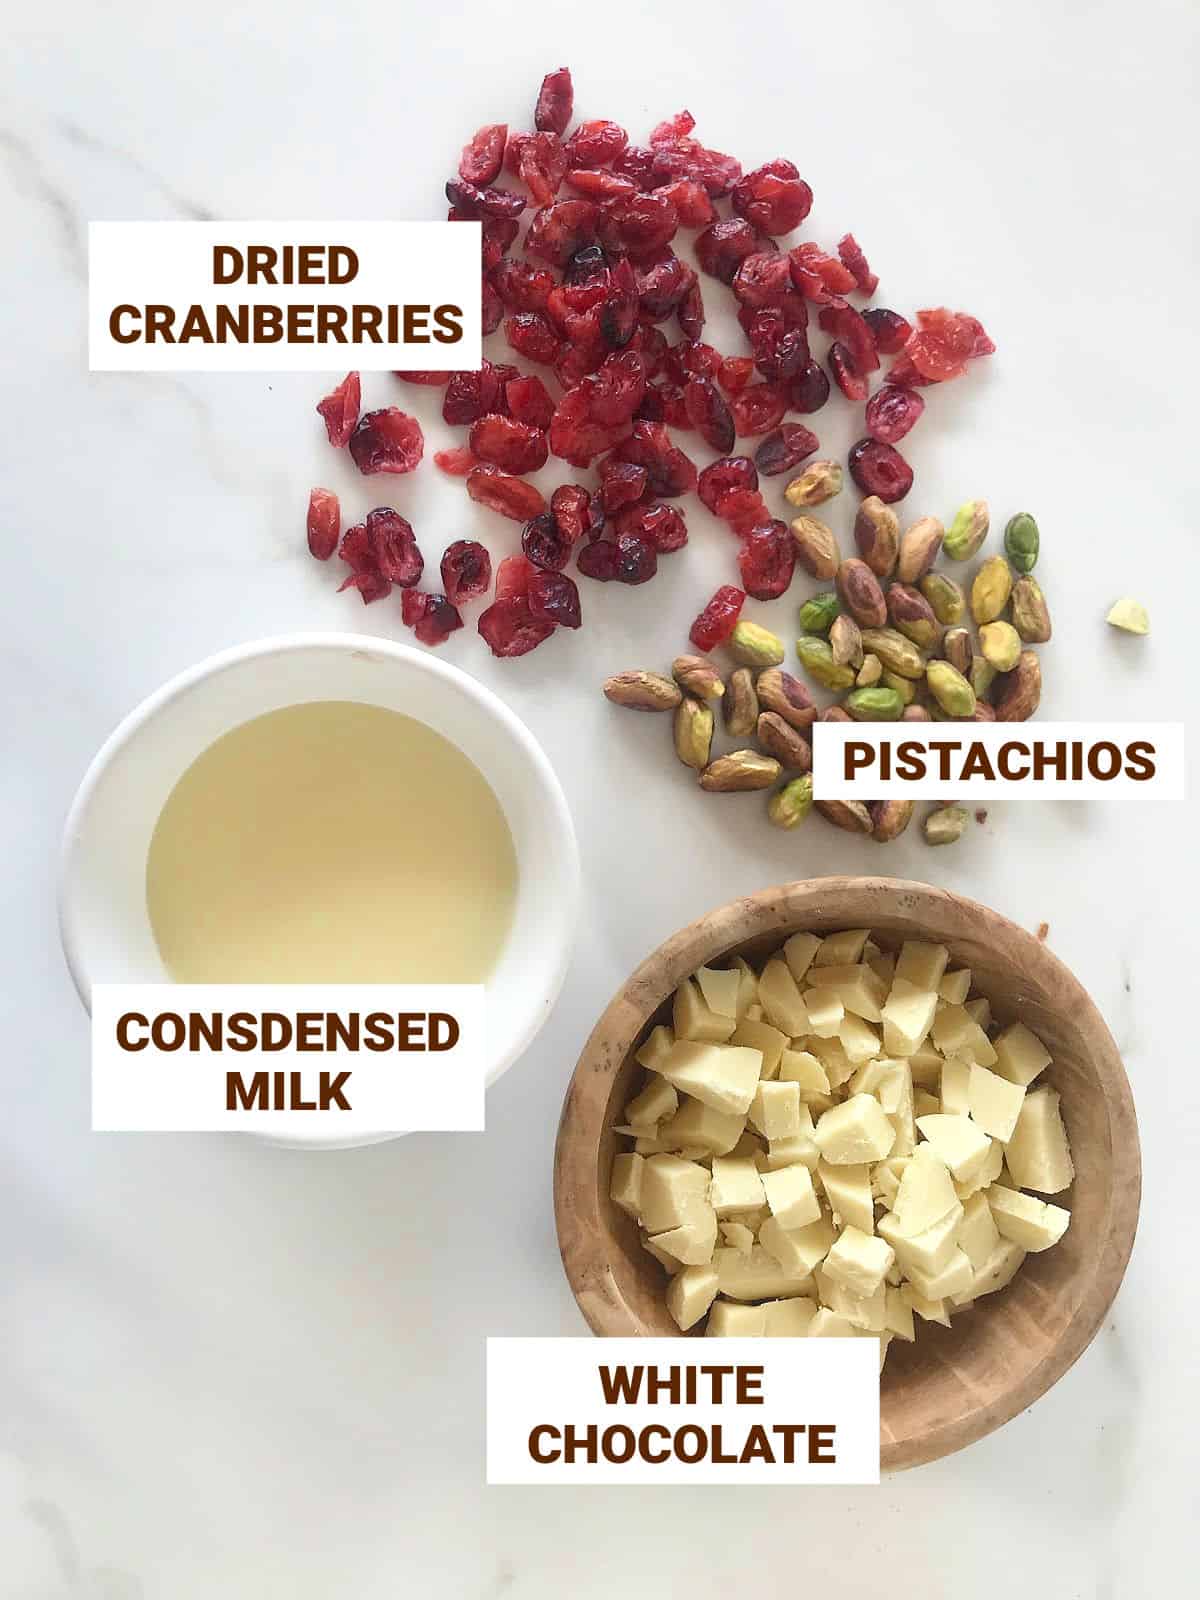 Loose cranberries and pistachios, white chocolate and condensed milk in bowls on a white surface.